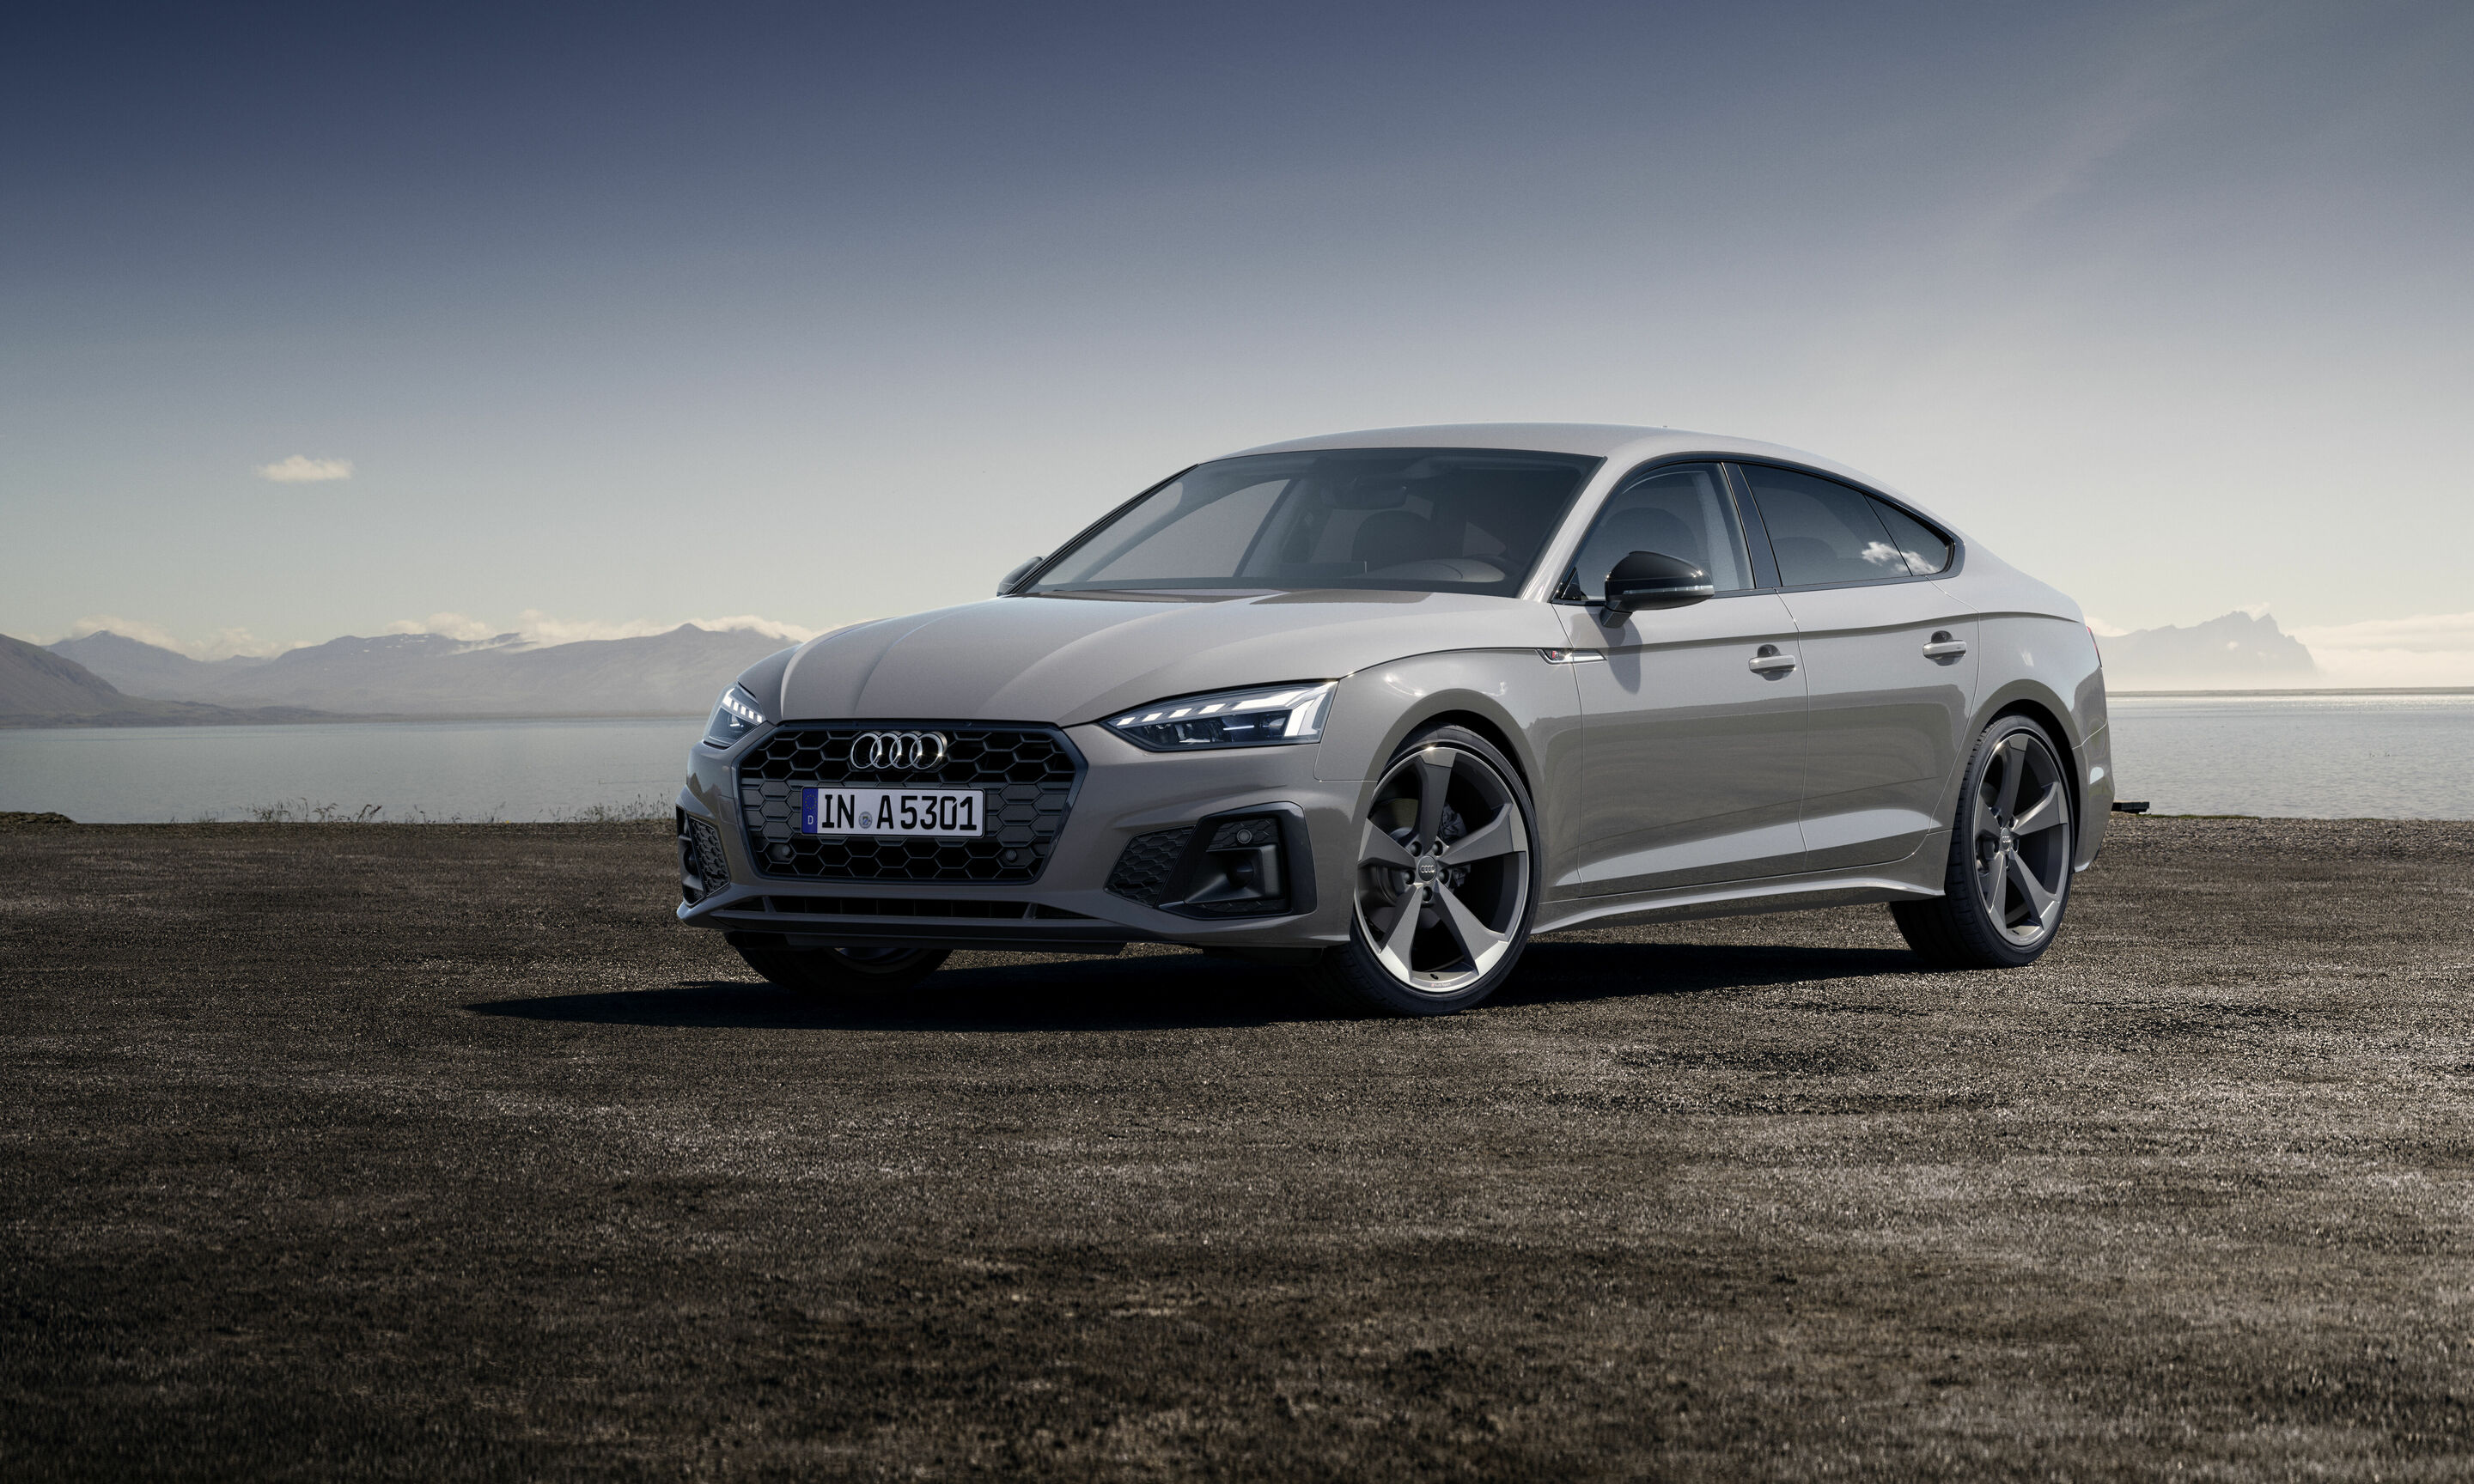 Audi A5 Sportback: looks, performance and utility